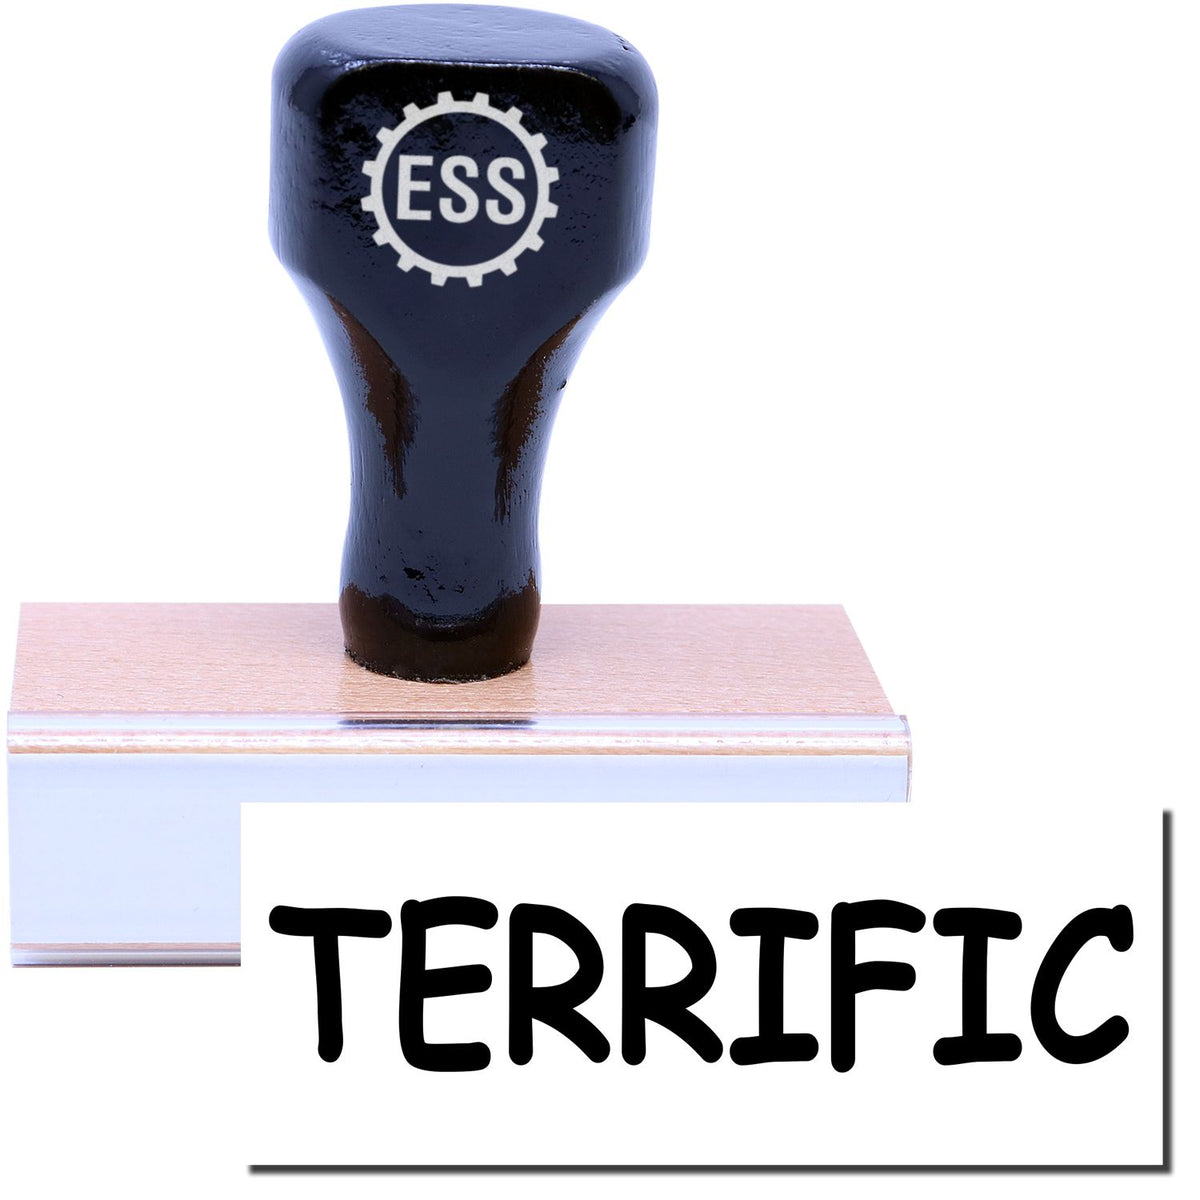 A stock office rubber stamp with a stamped image showing how the text &quot;TERRIFIC&quot; in a large font is displayed after stamping.